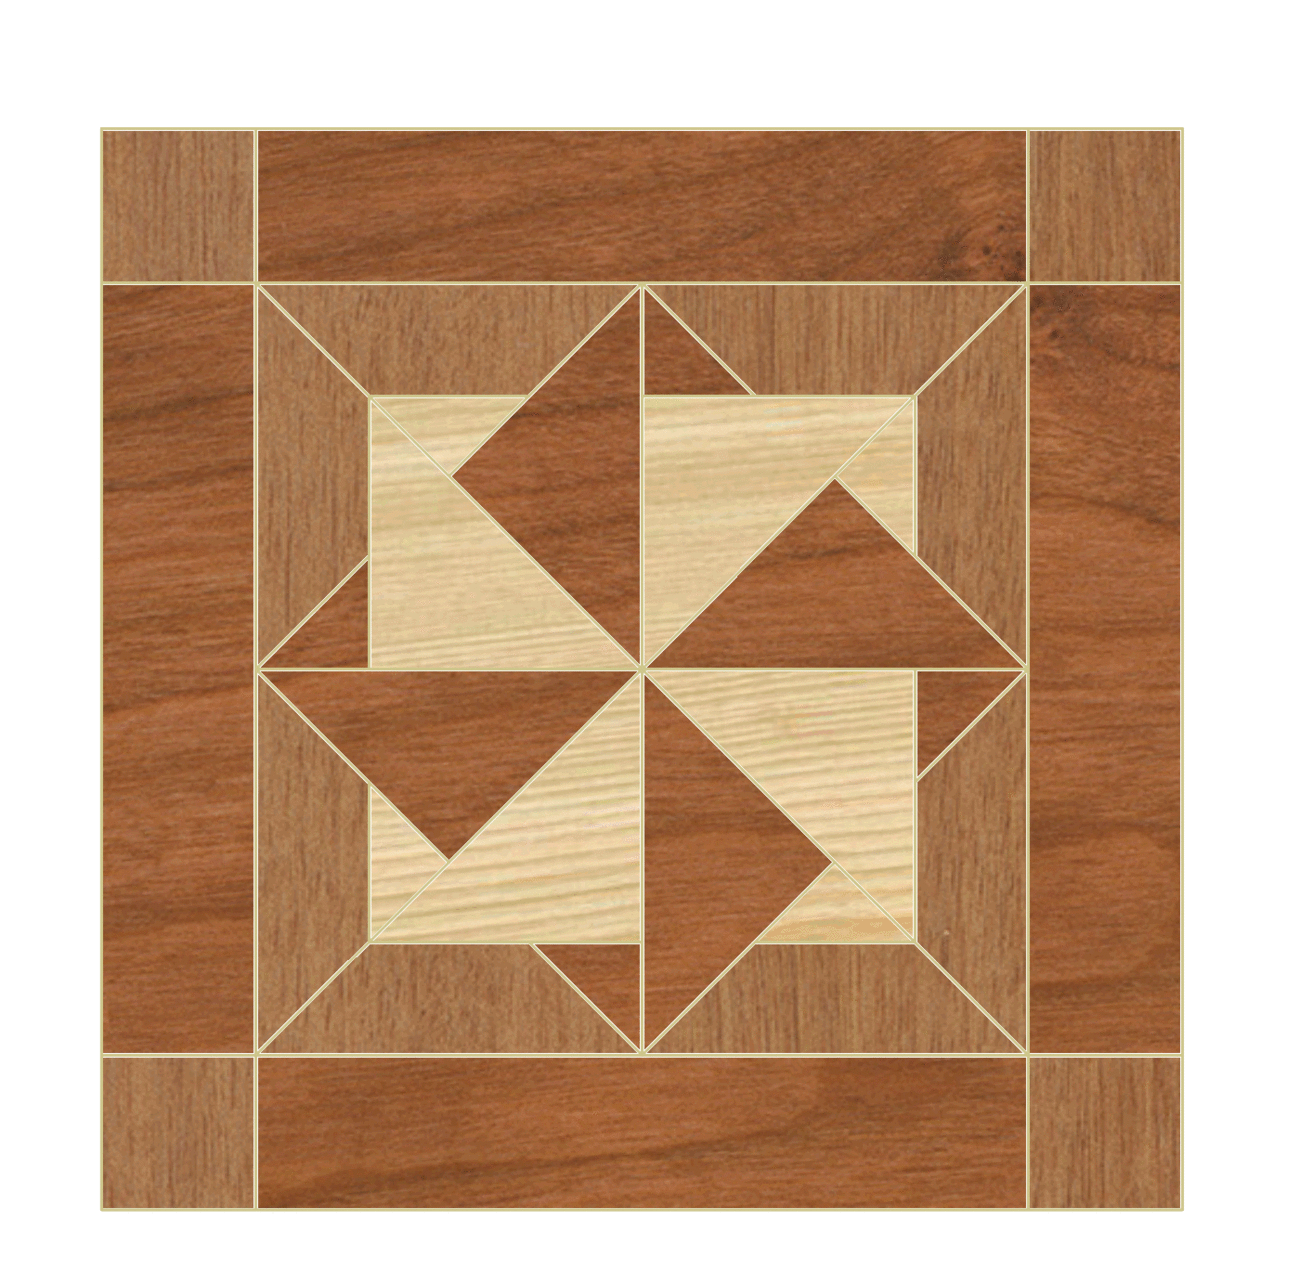 Woodworking quilt patterns Main Image